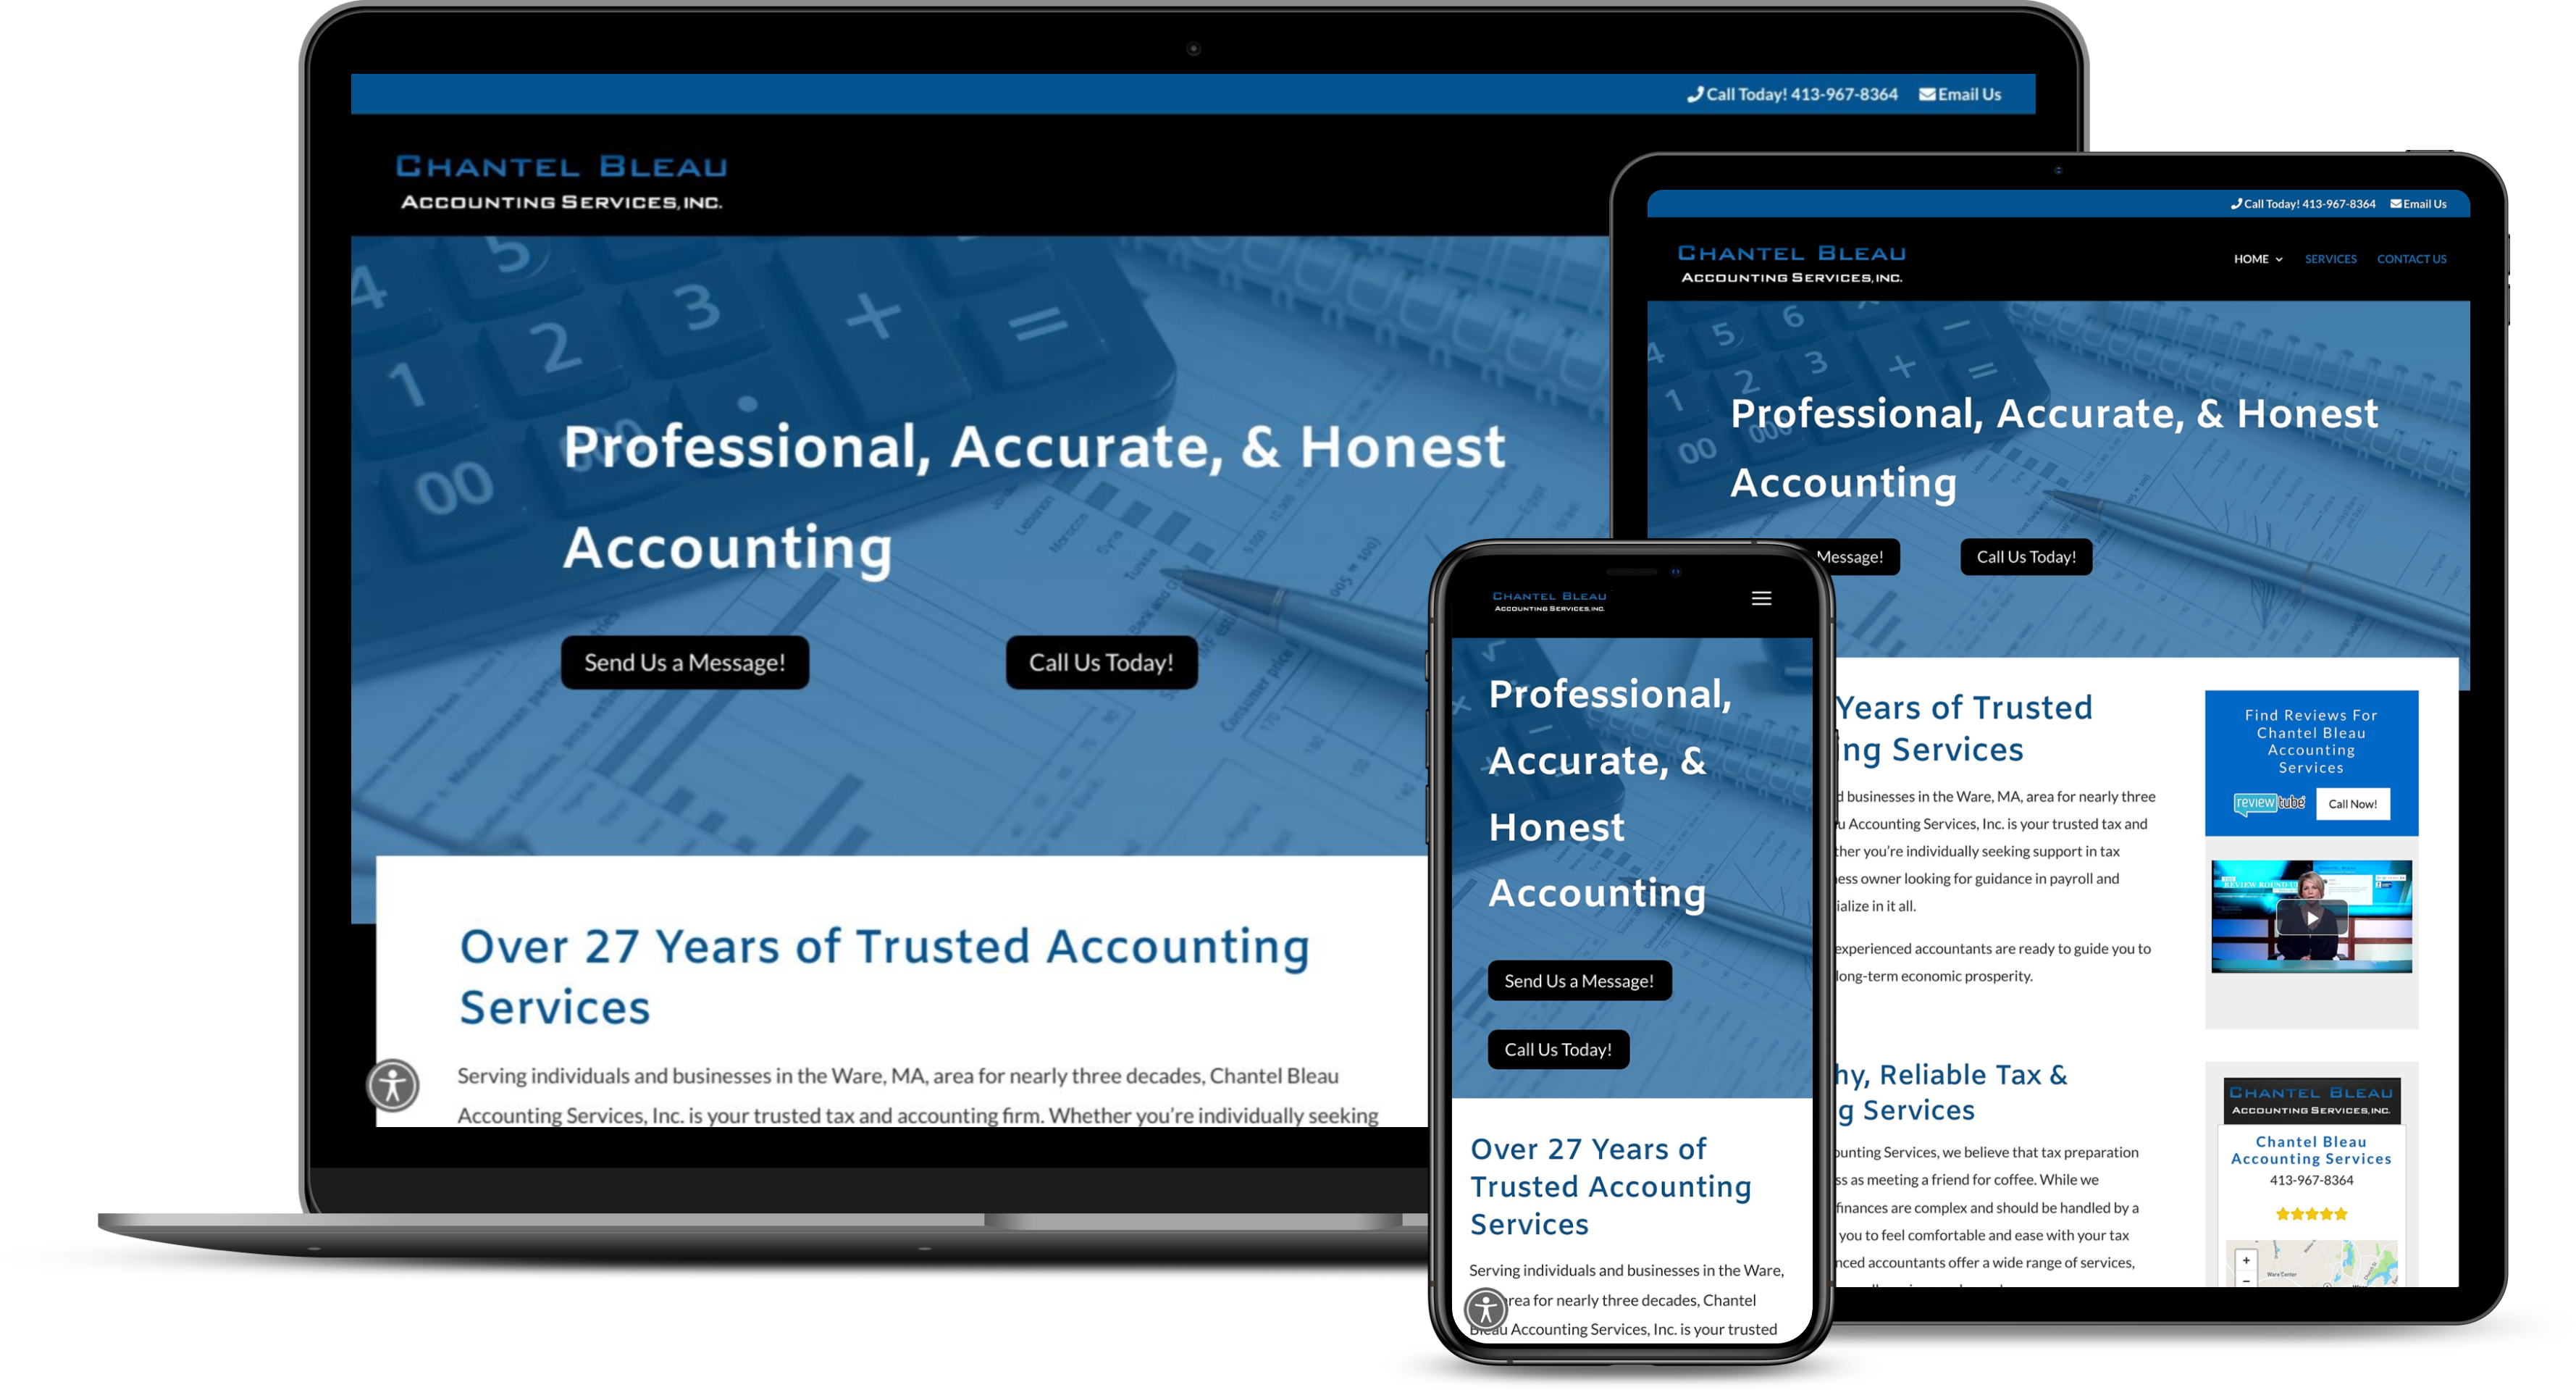 Chantel Bleau Accounting Services